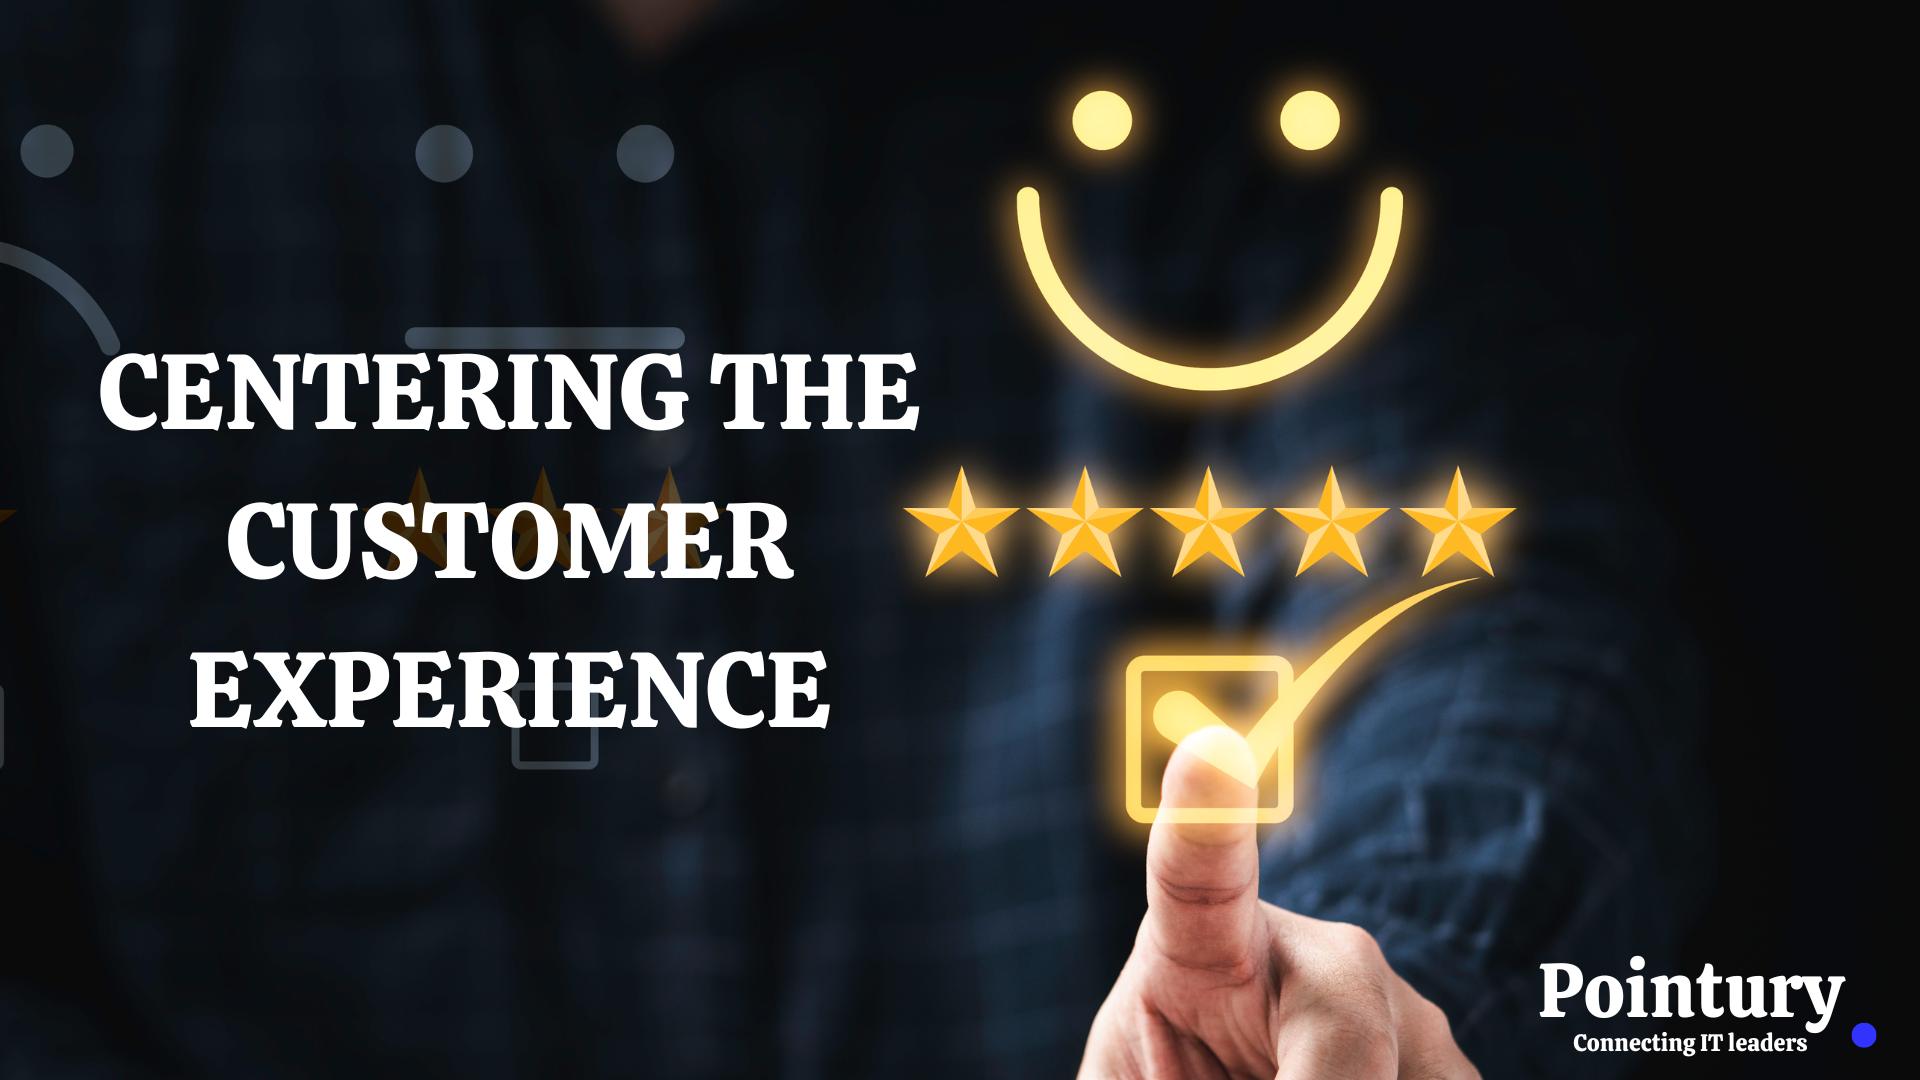 CENTERING THE CUSTOMER EXPERIENCE